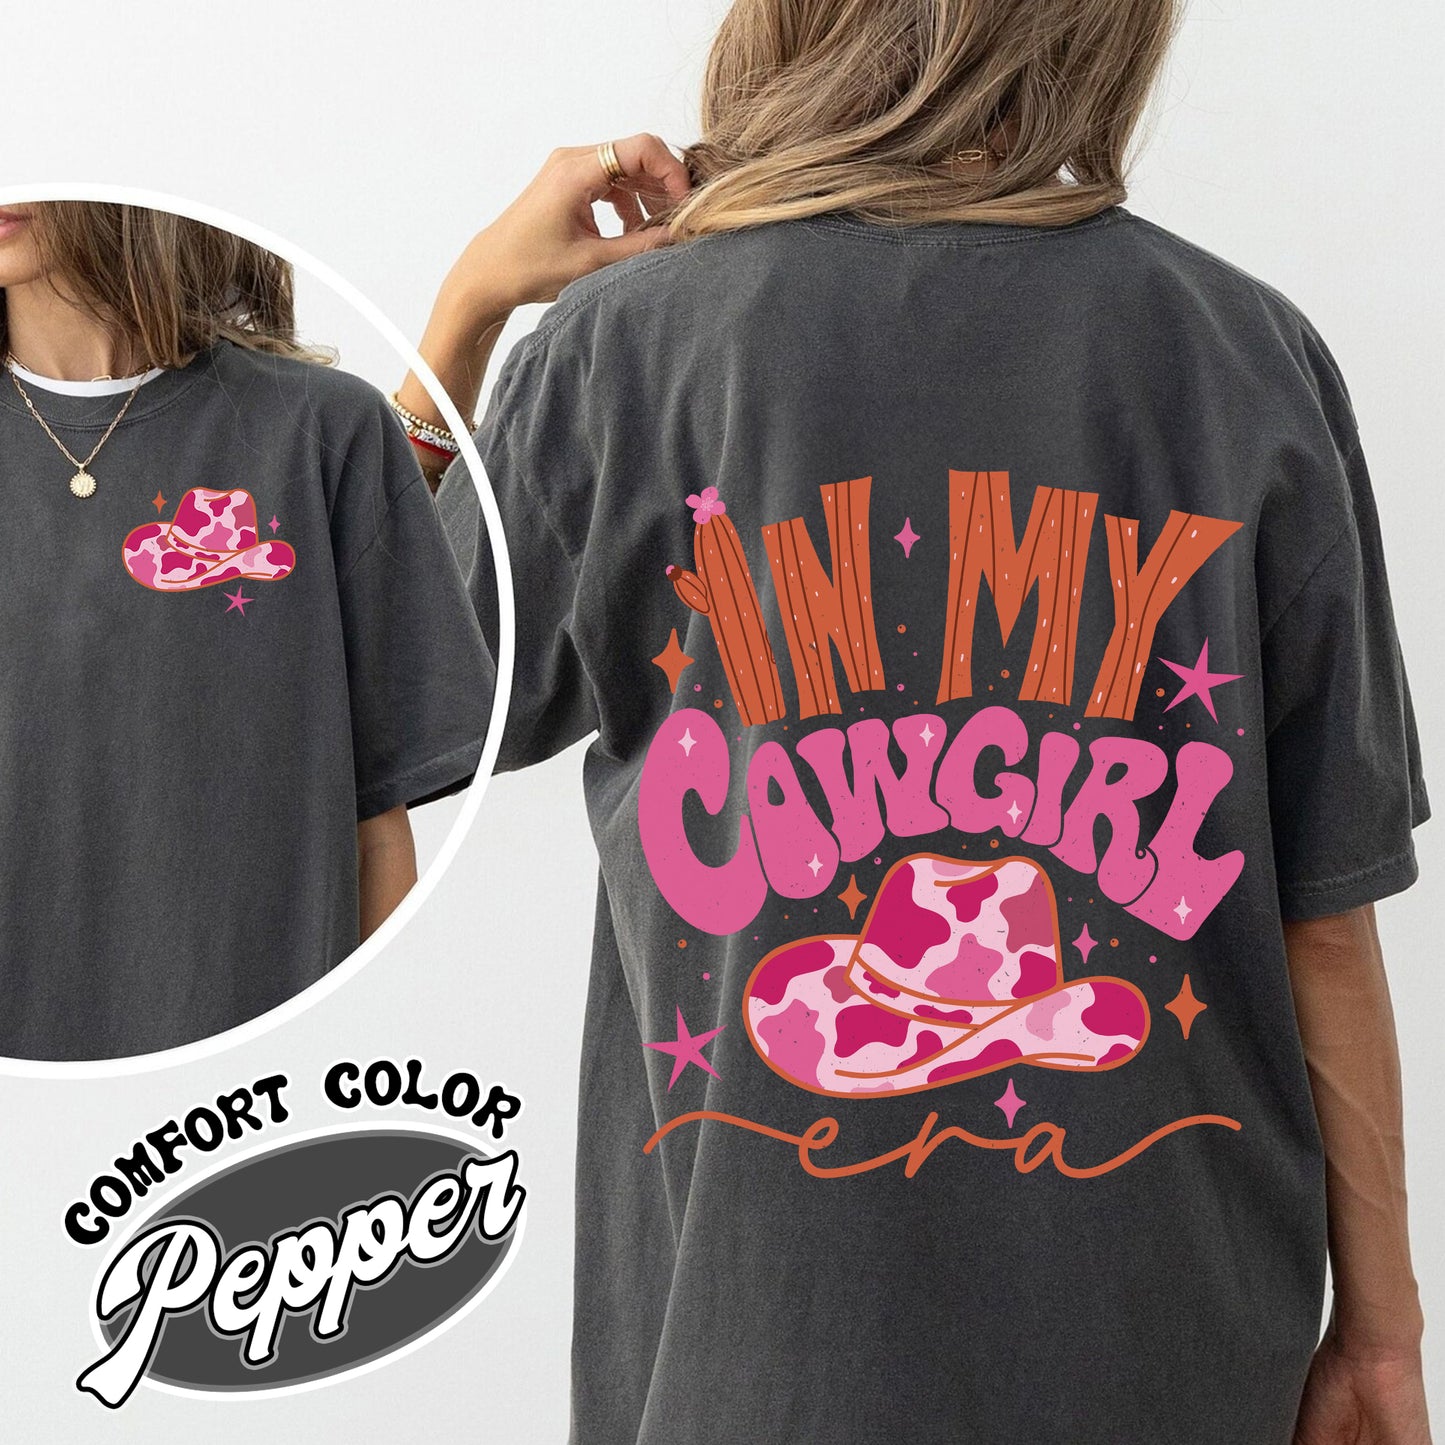 In My Cowgirl Era Comfort Color Shirt, Cowgirl up, Cowgirl Pink Boots Shirt, Preppy Cowgirl, Cowgirl Era Shirt, Cowgirl Shirt